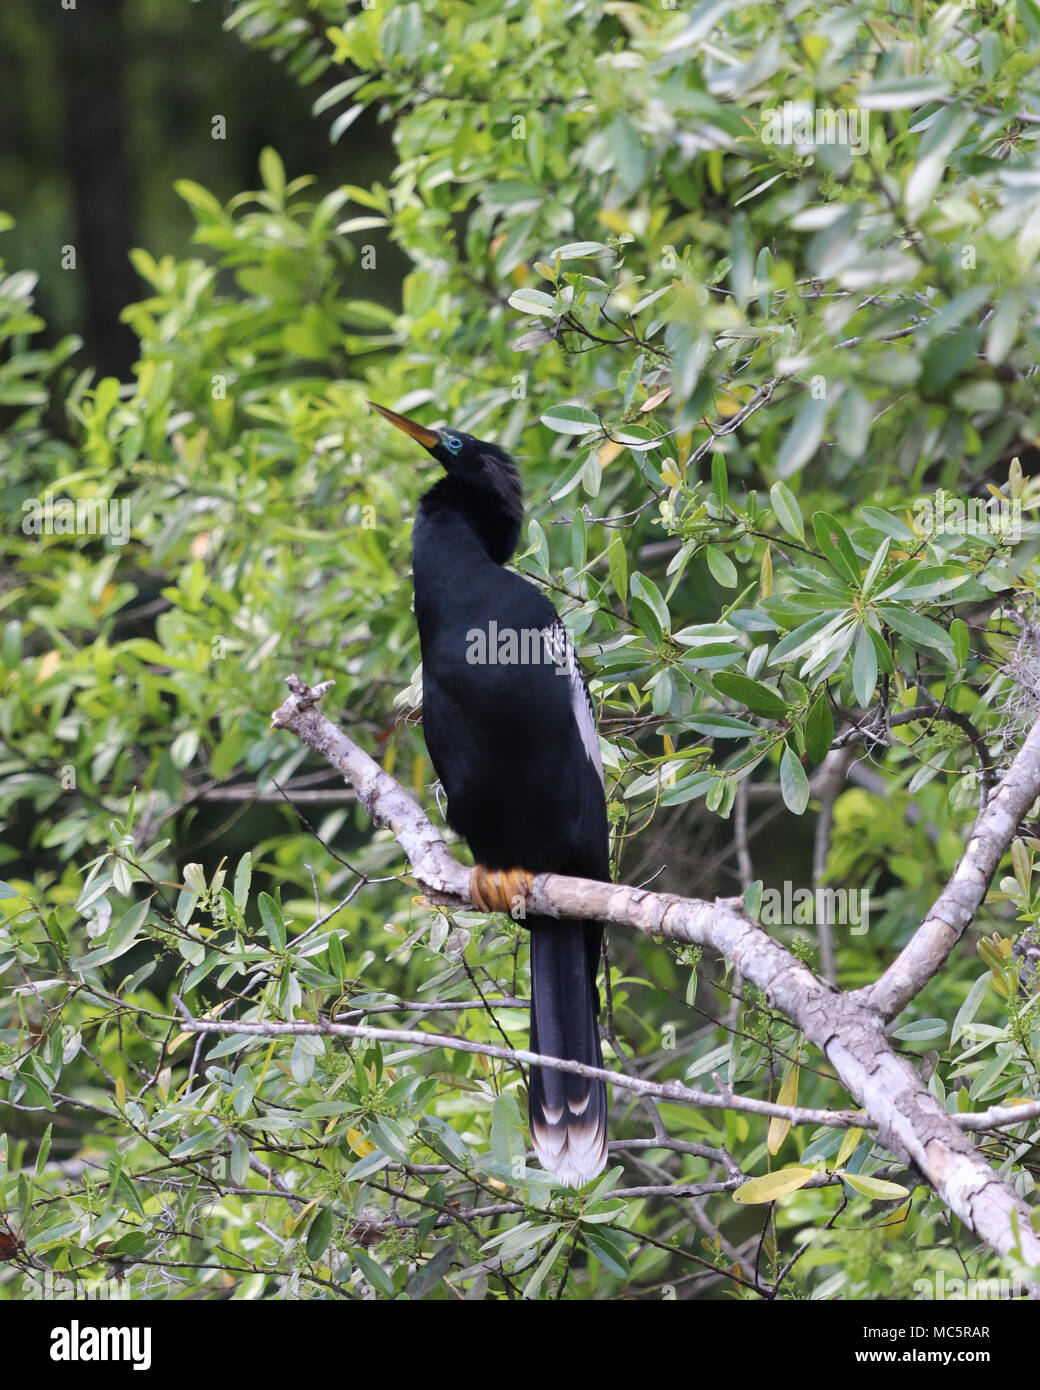 American darter (Anhinga) perched along the Rainbow River in Dunnellon, Florida Stock Photo